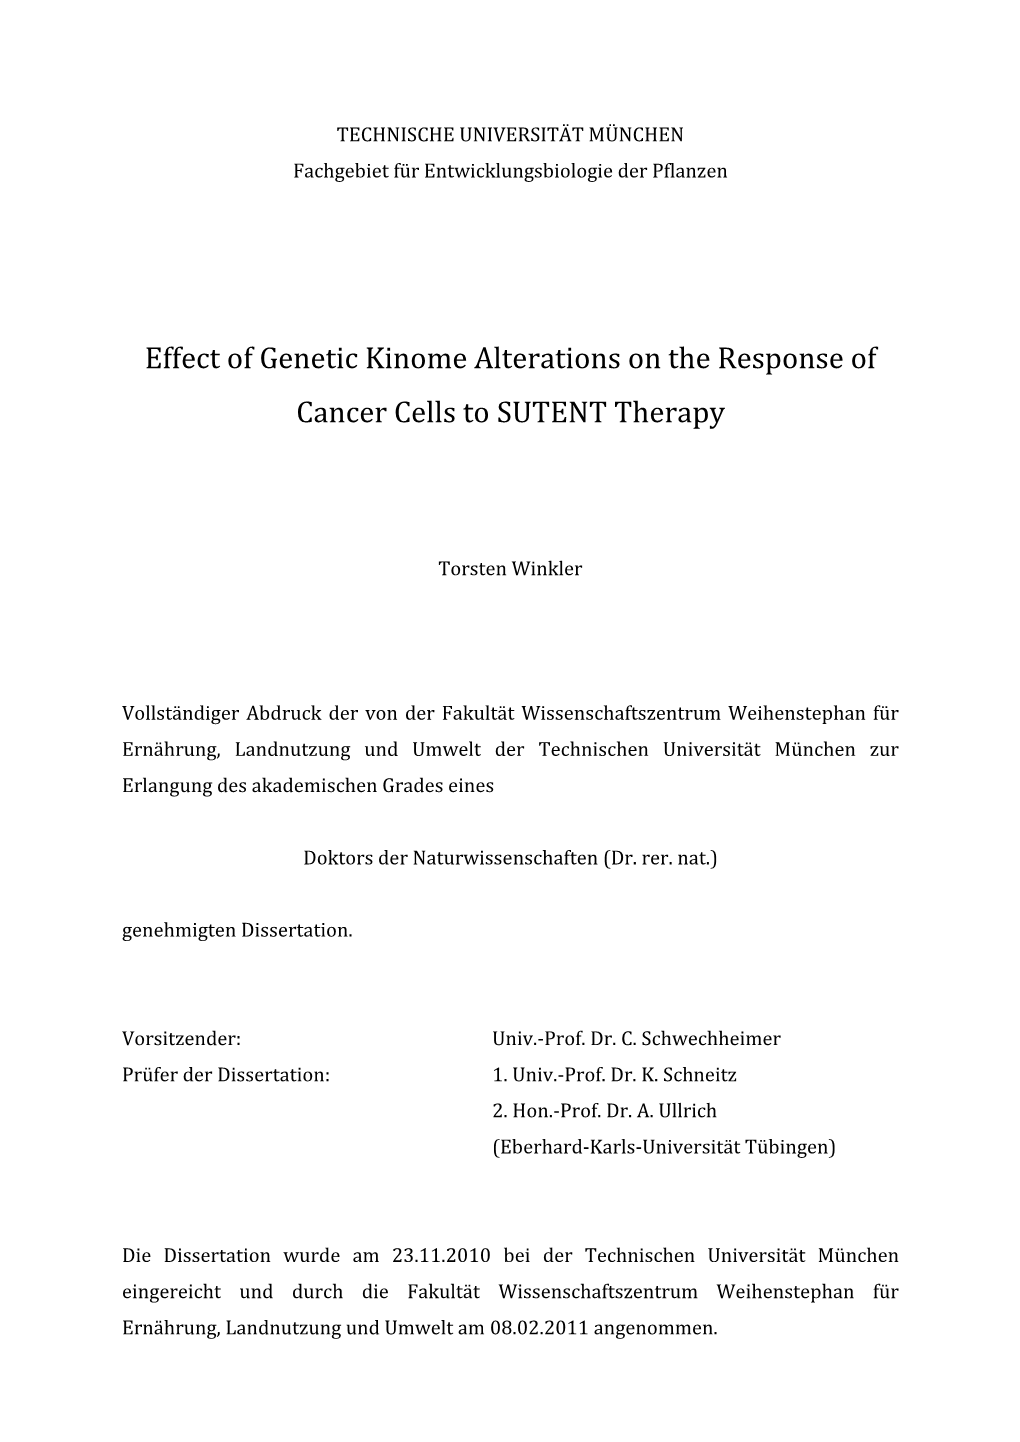 Effect of Genetic Kinome Alterations on the Response of Cancer Cells to SUTENT Therapy